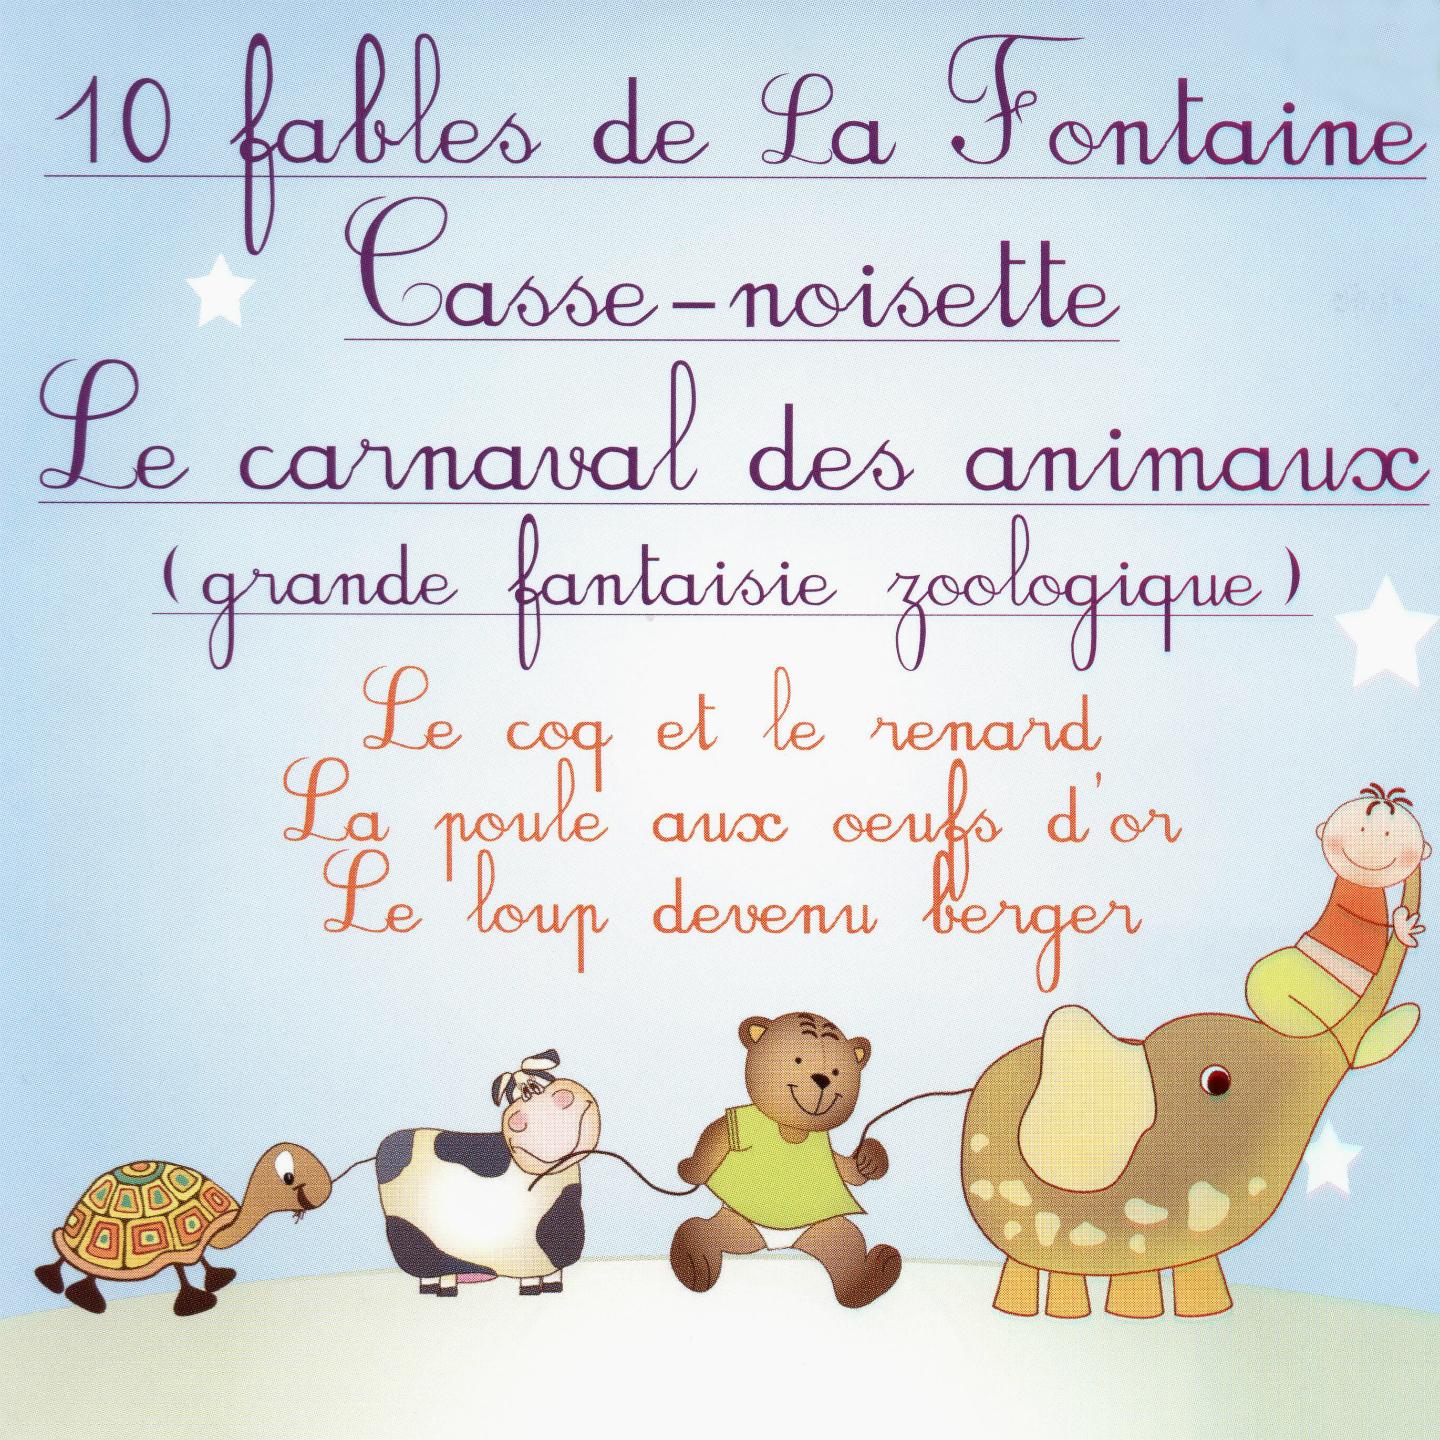 Le carnaval des animaux: III. He miones